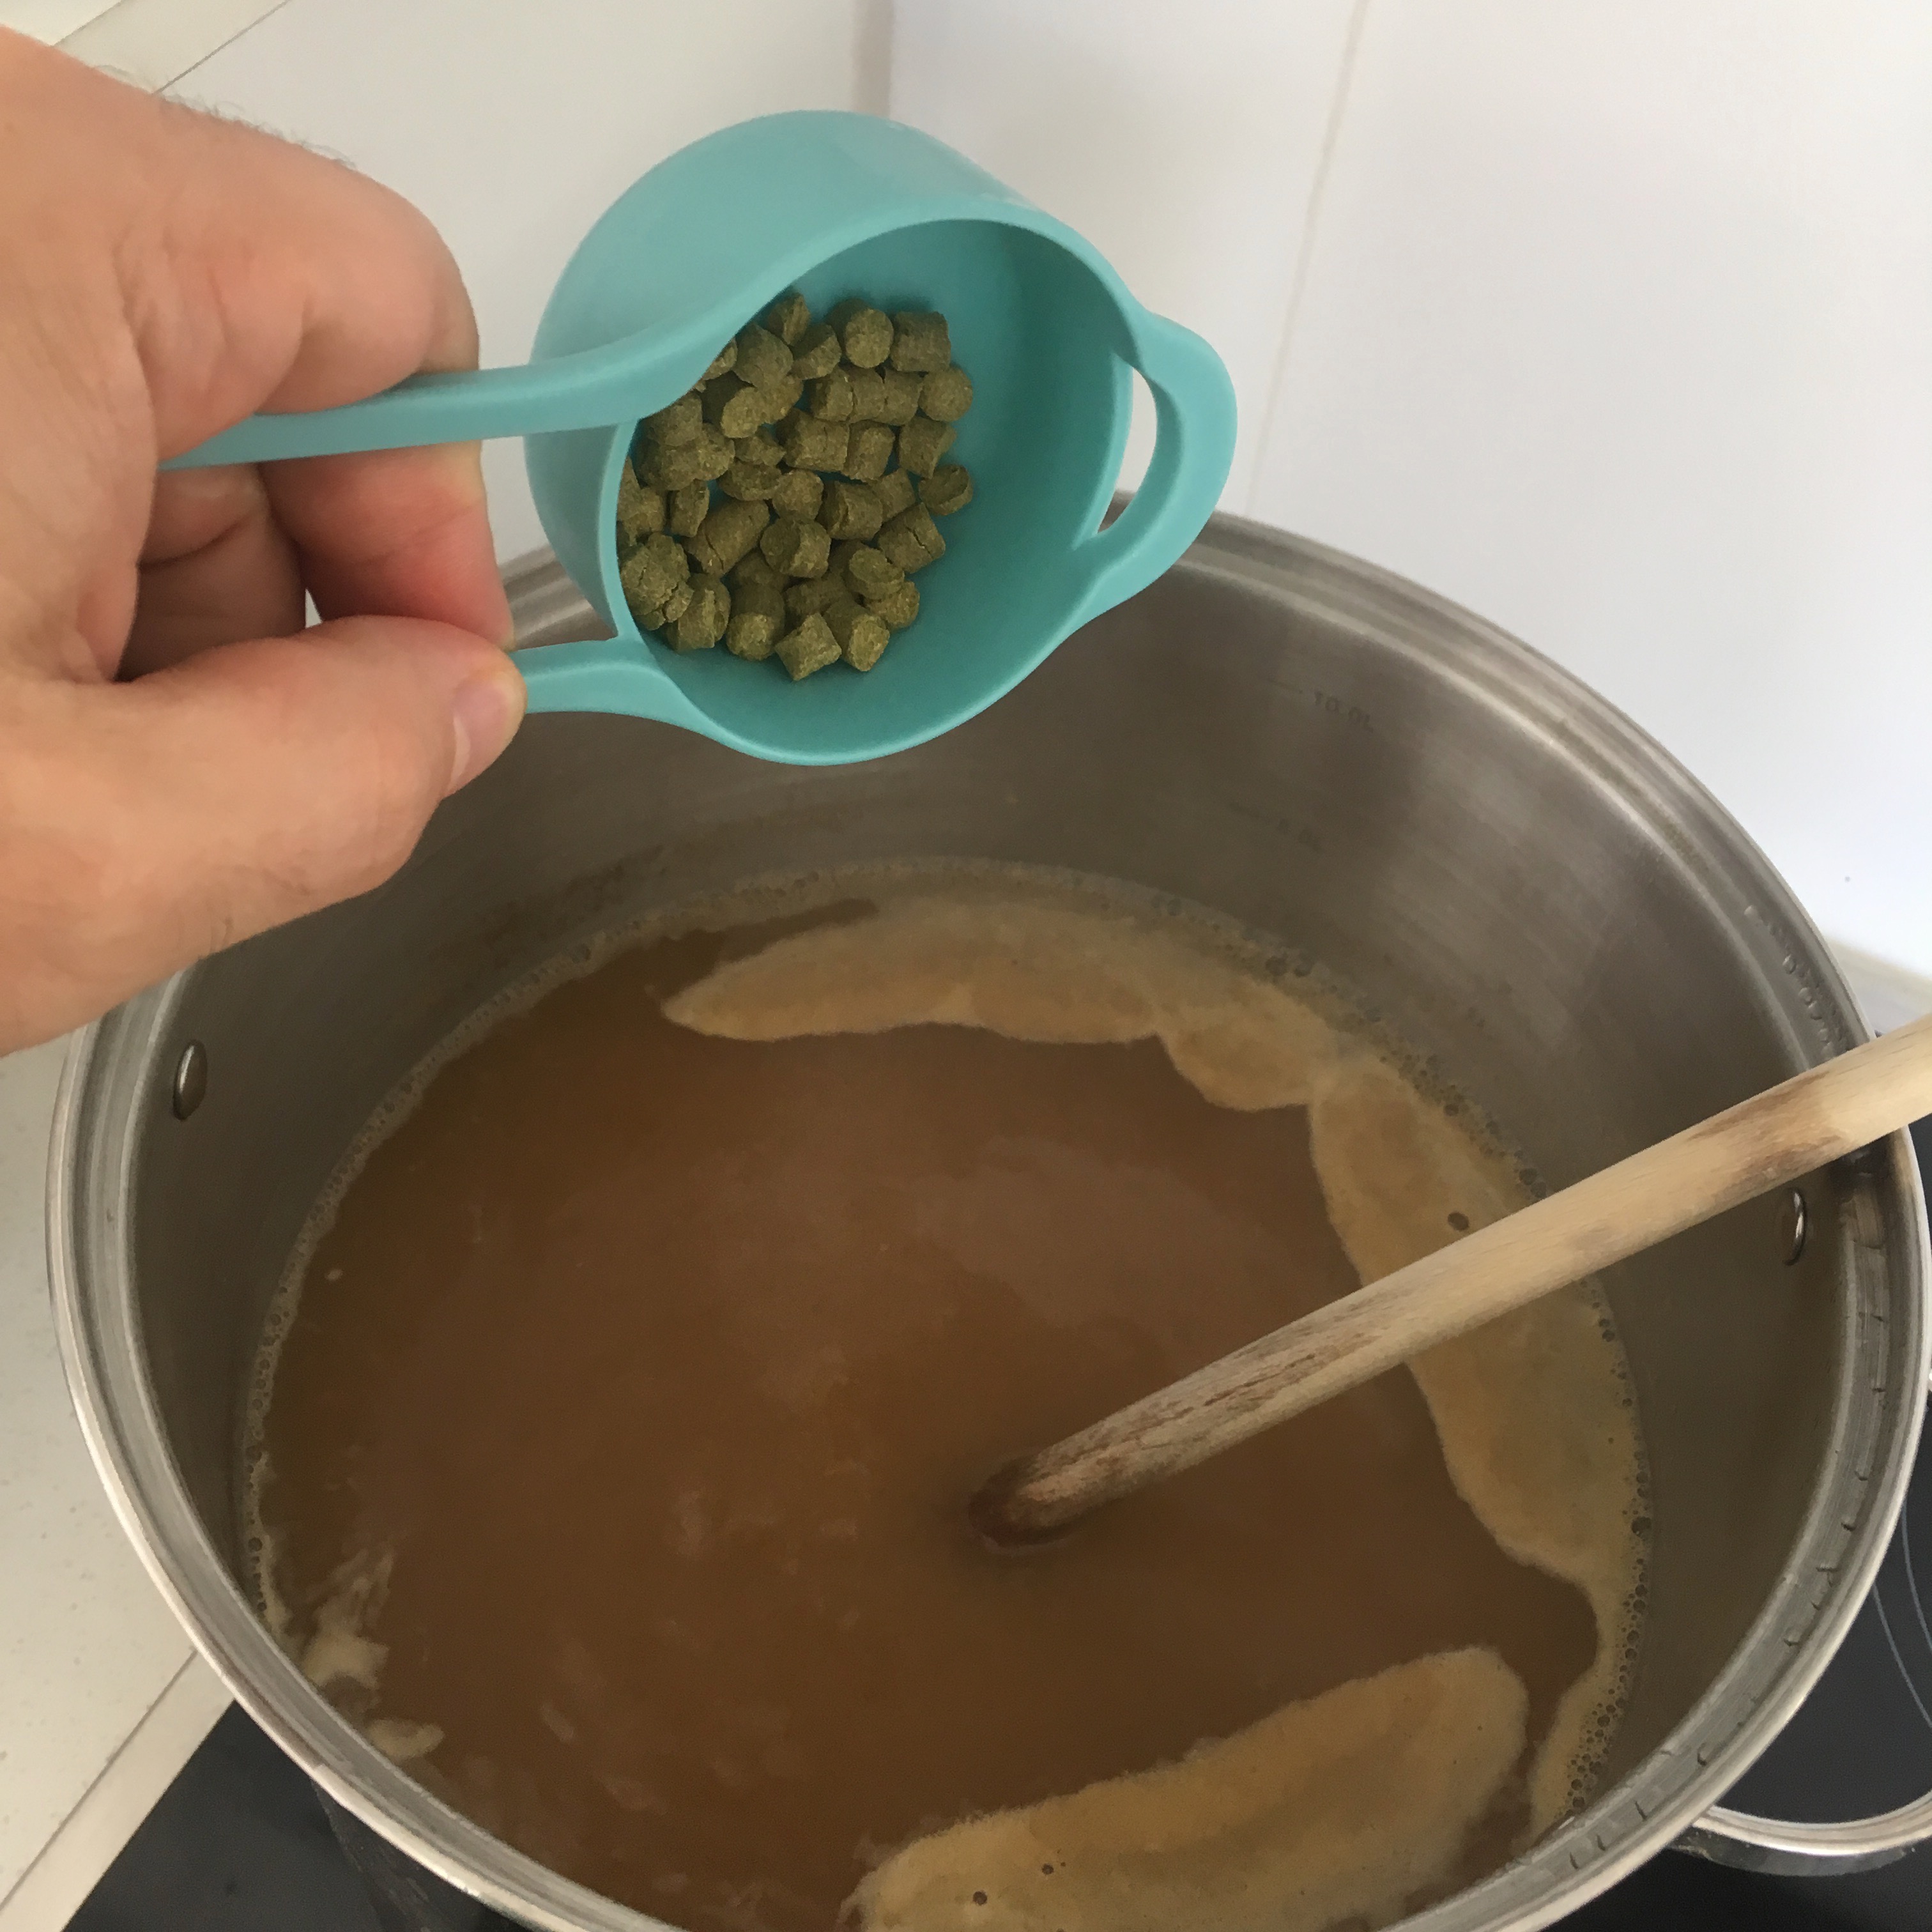 Add the hop pellets at the desired times. In this instance I added a portion of the hops every 10 minutes